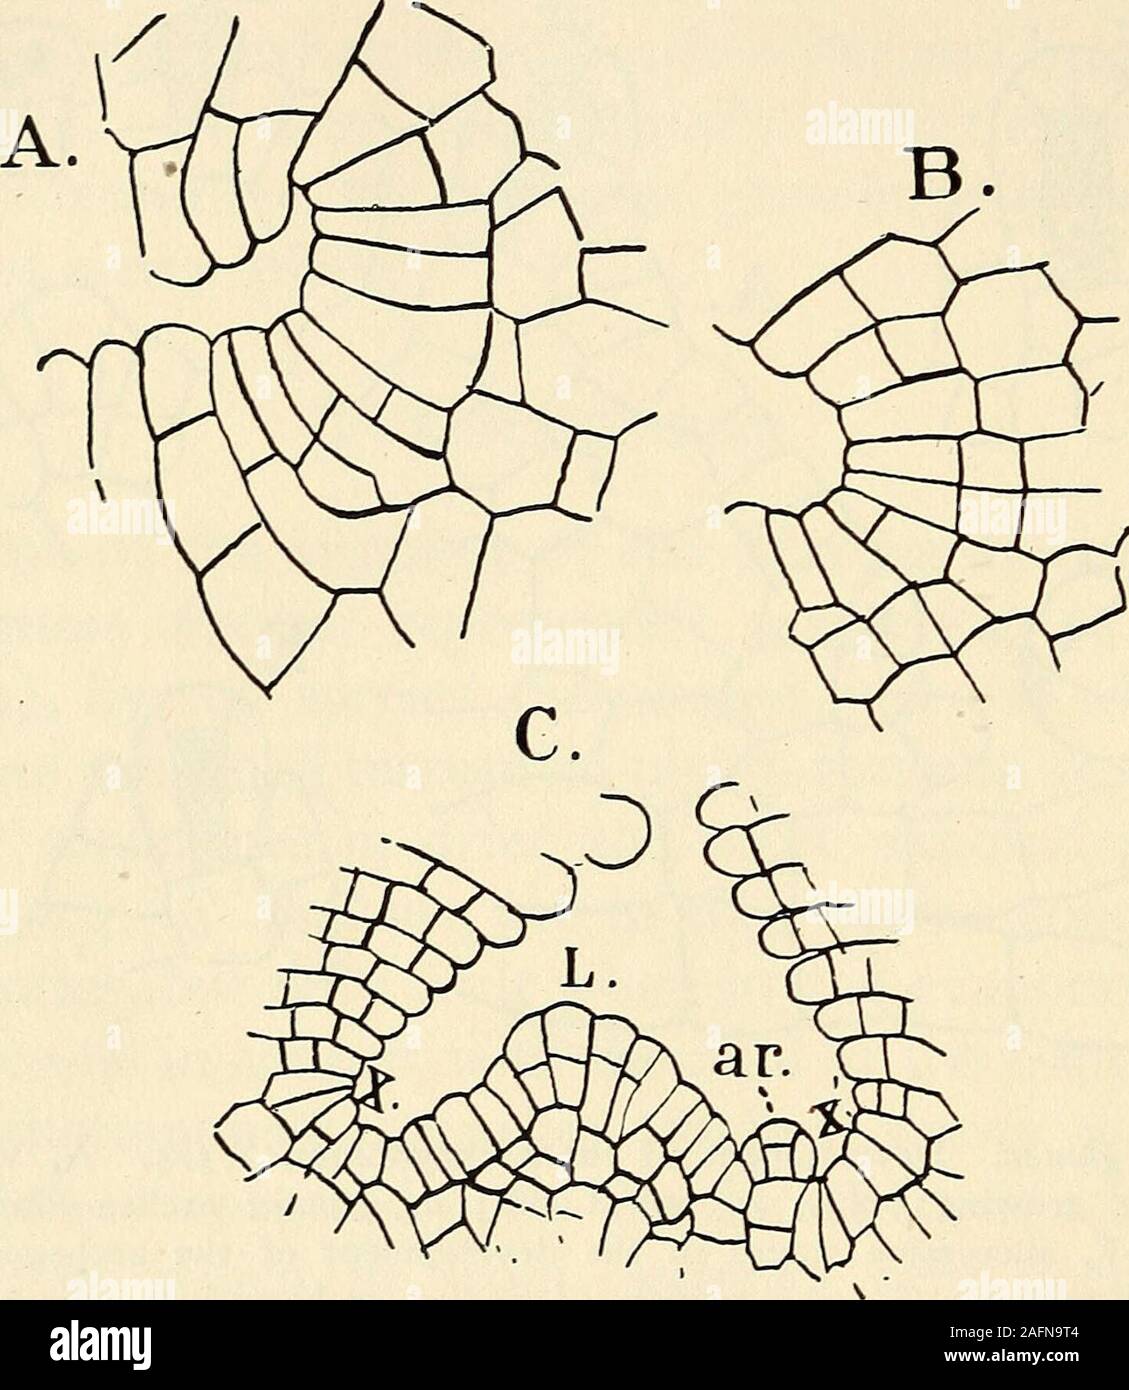 . The structure and development of mosses and ferns (Archegoniatae). r pits to be formed between the adja-cent cells (Fig. 3, C). The subsequent divisions in the papillaeare all transverse, and this transforms each papillate surface cellinto a row of cells which, as it elongates, causes the pitsbetween it and the adjacent ones to become deep but narrowair-channels, so that in the older parts of the thallus the upperportion is composed of closely-set vertical rows of chlorophyll-bearing cells separated by narrow clefts opening at the surface. 26 MOSSES AND FERNS CHAP. In Riccia glauca, as well Stock Photo